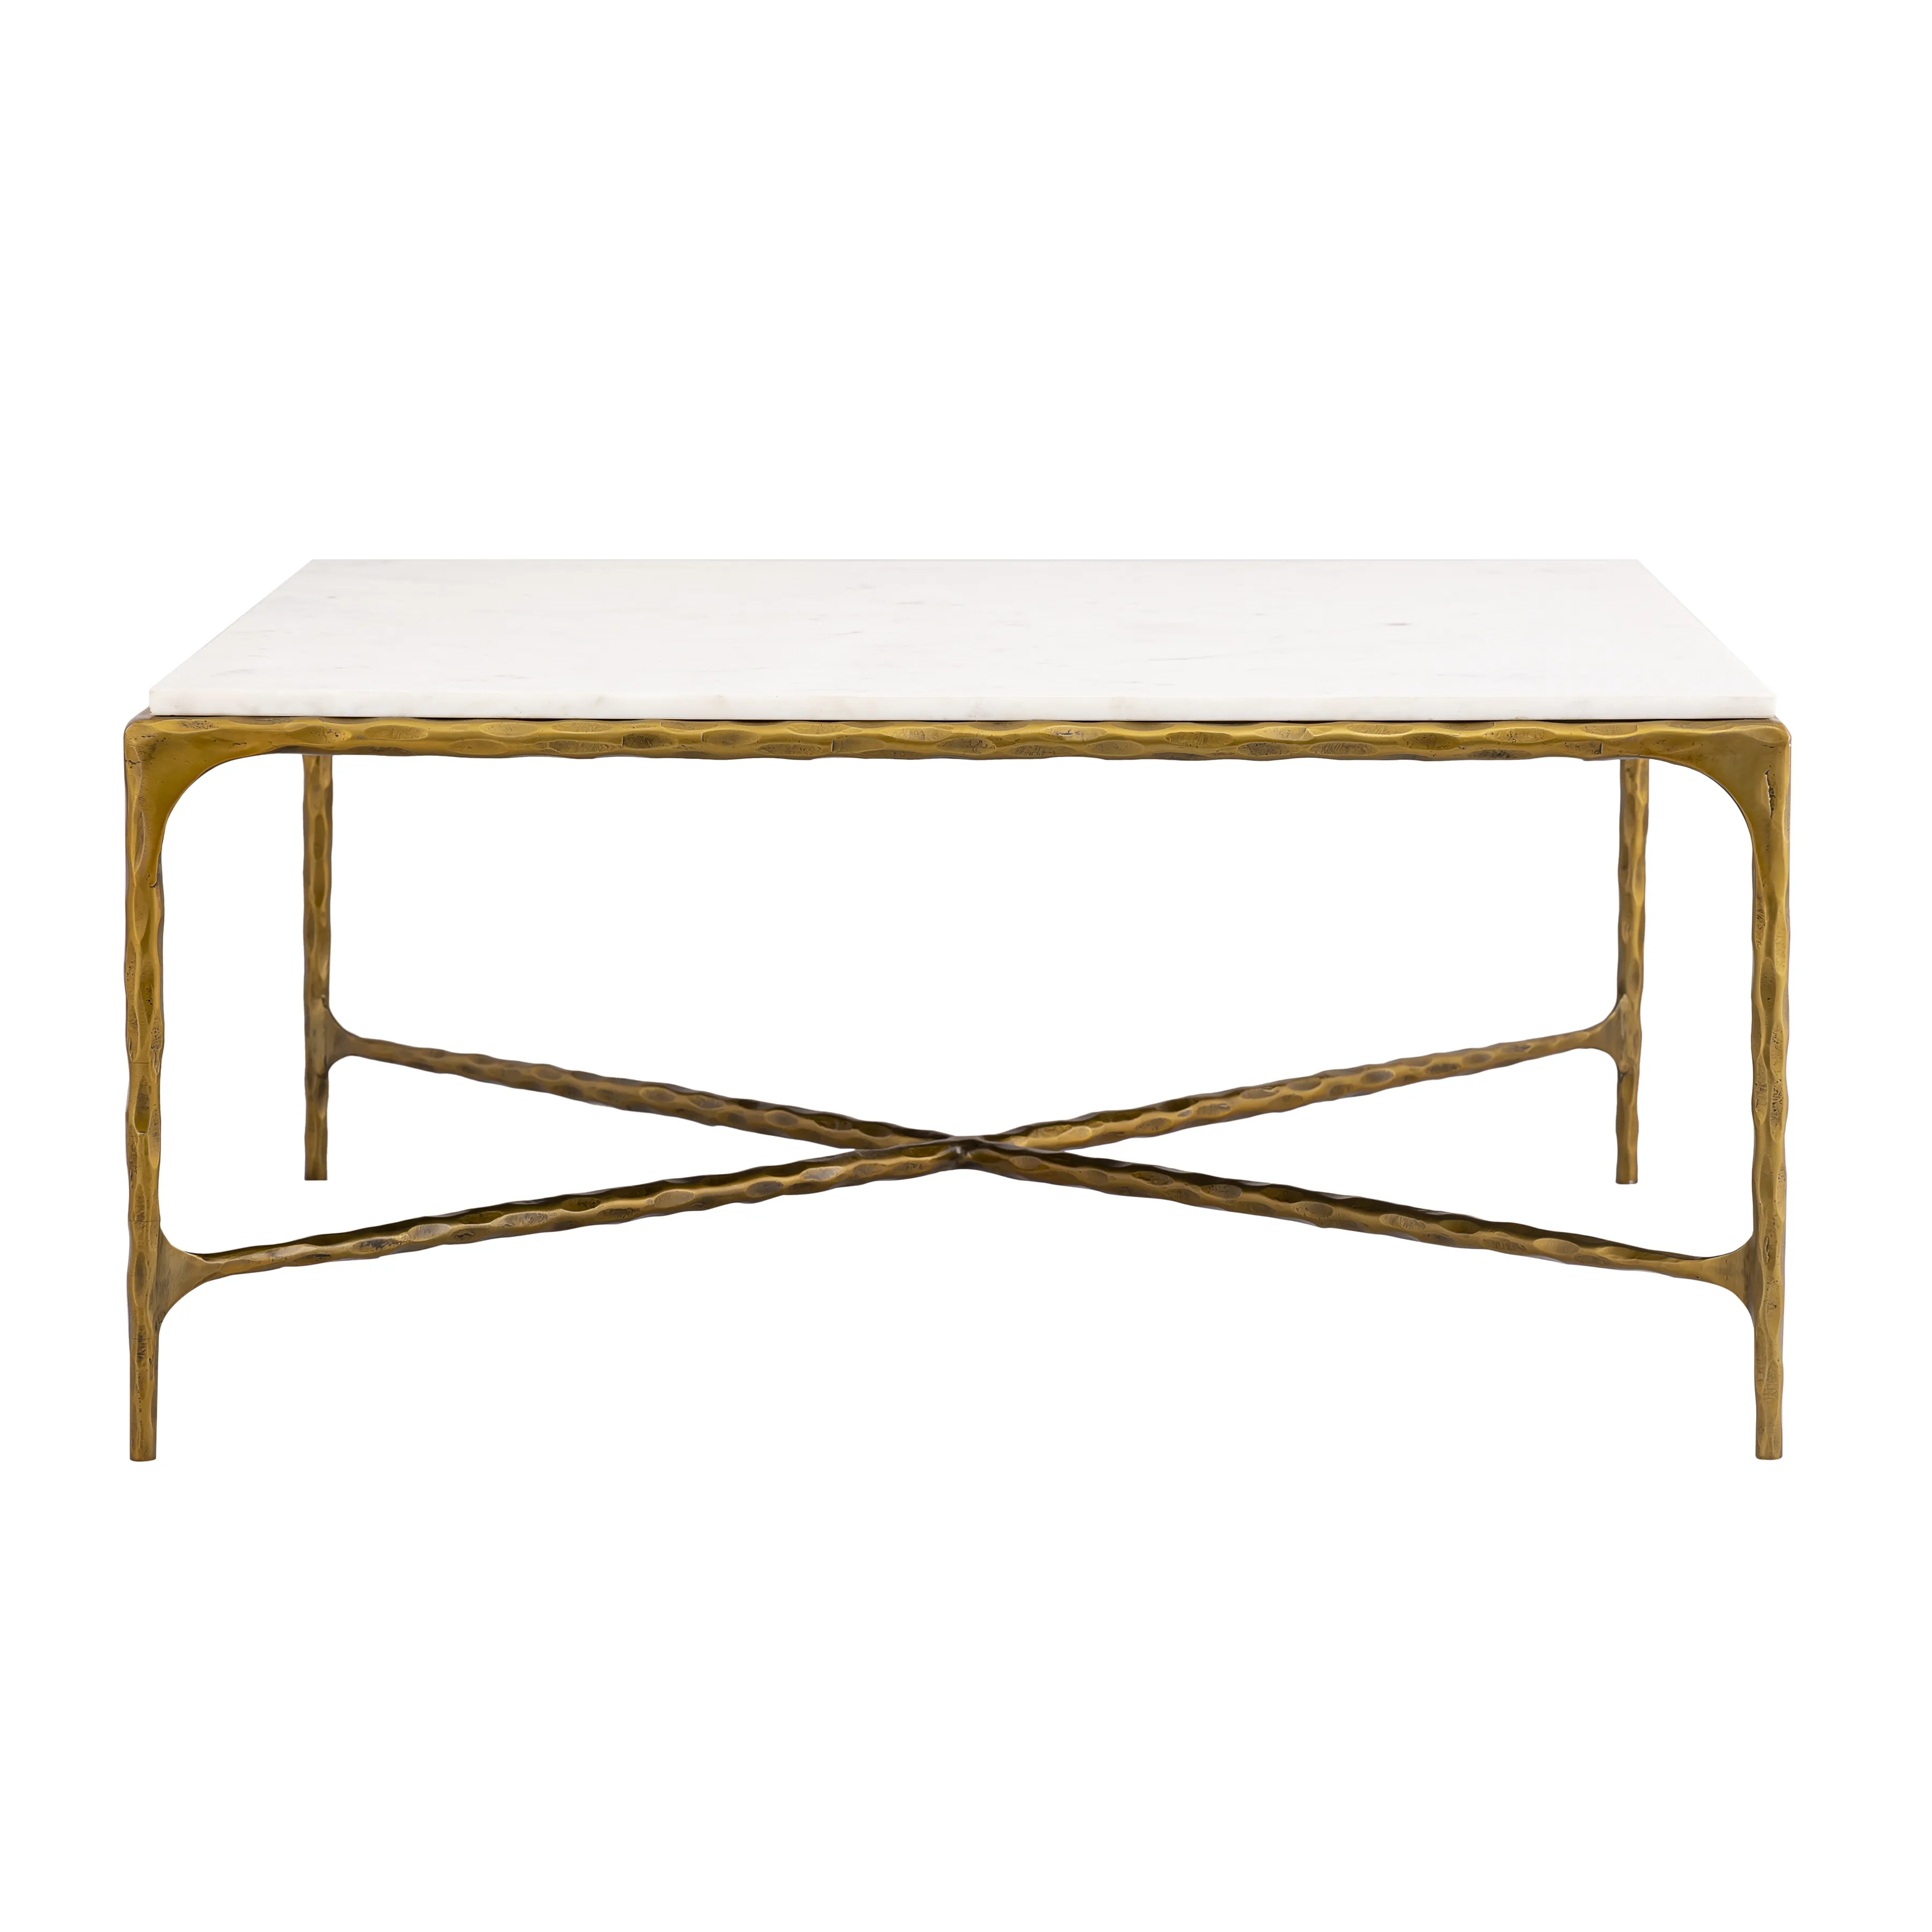 Seville Forged Gold Coffee Table